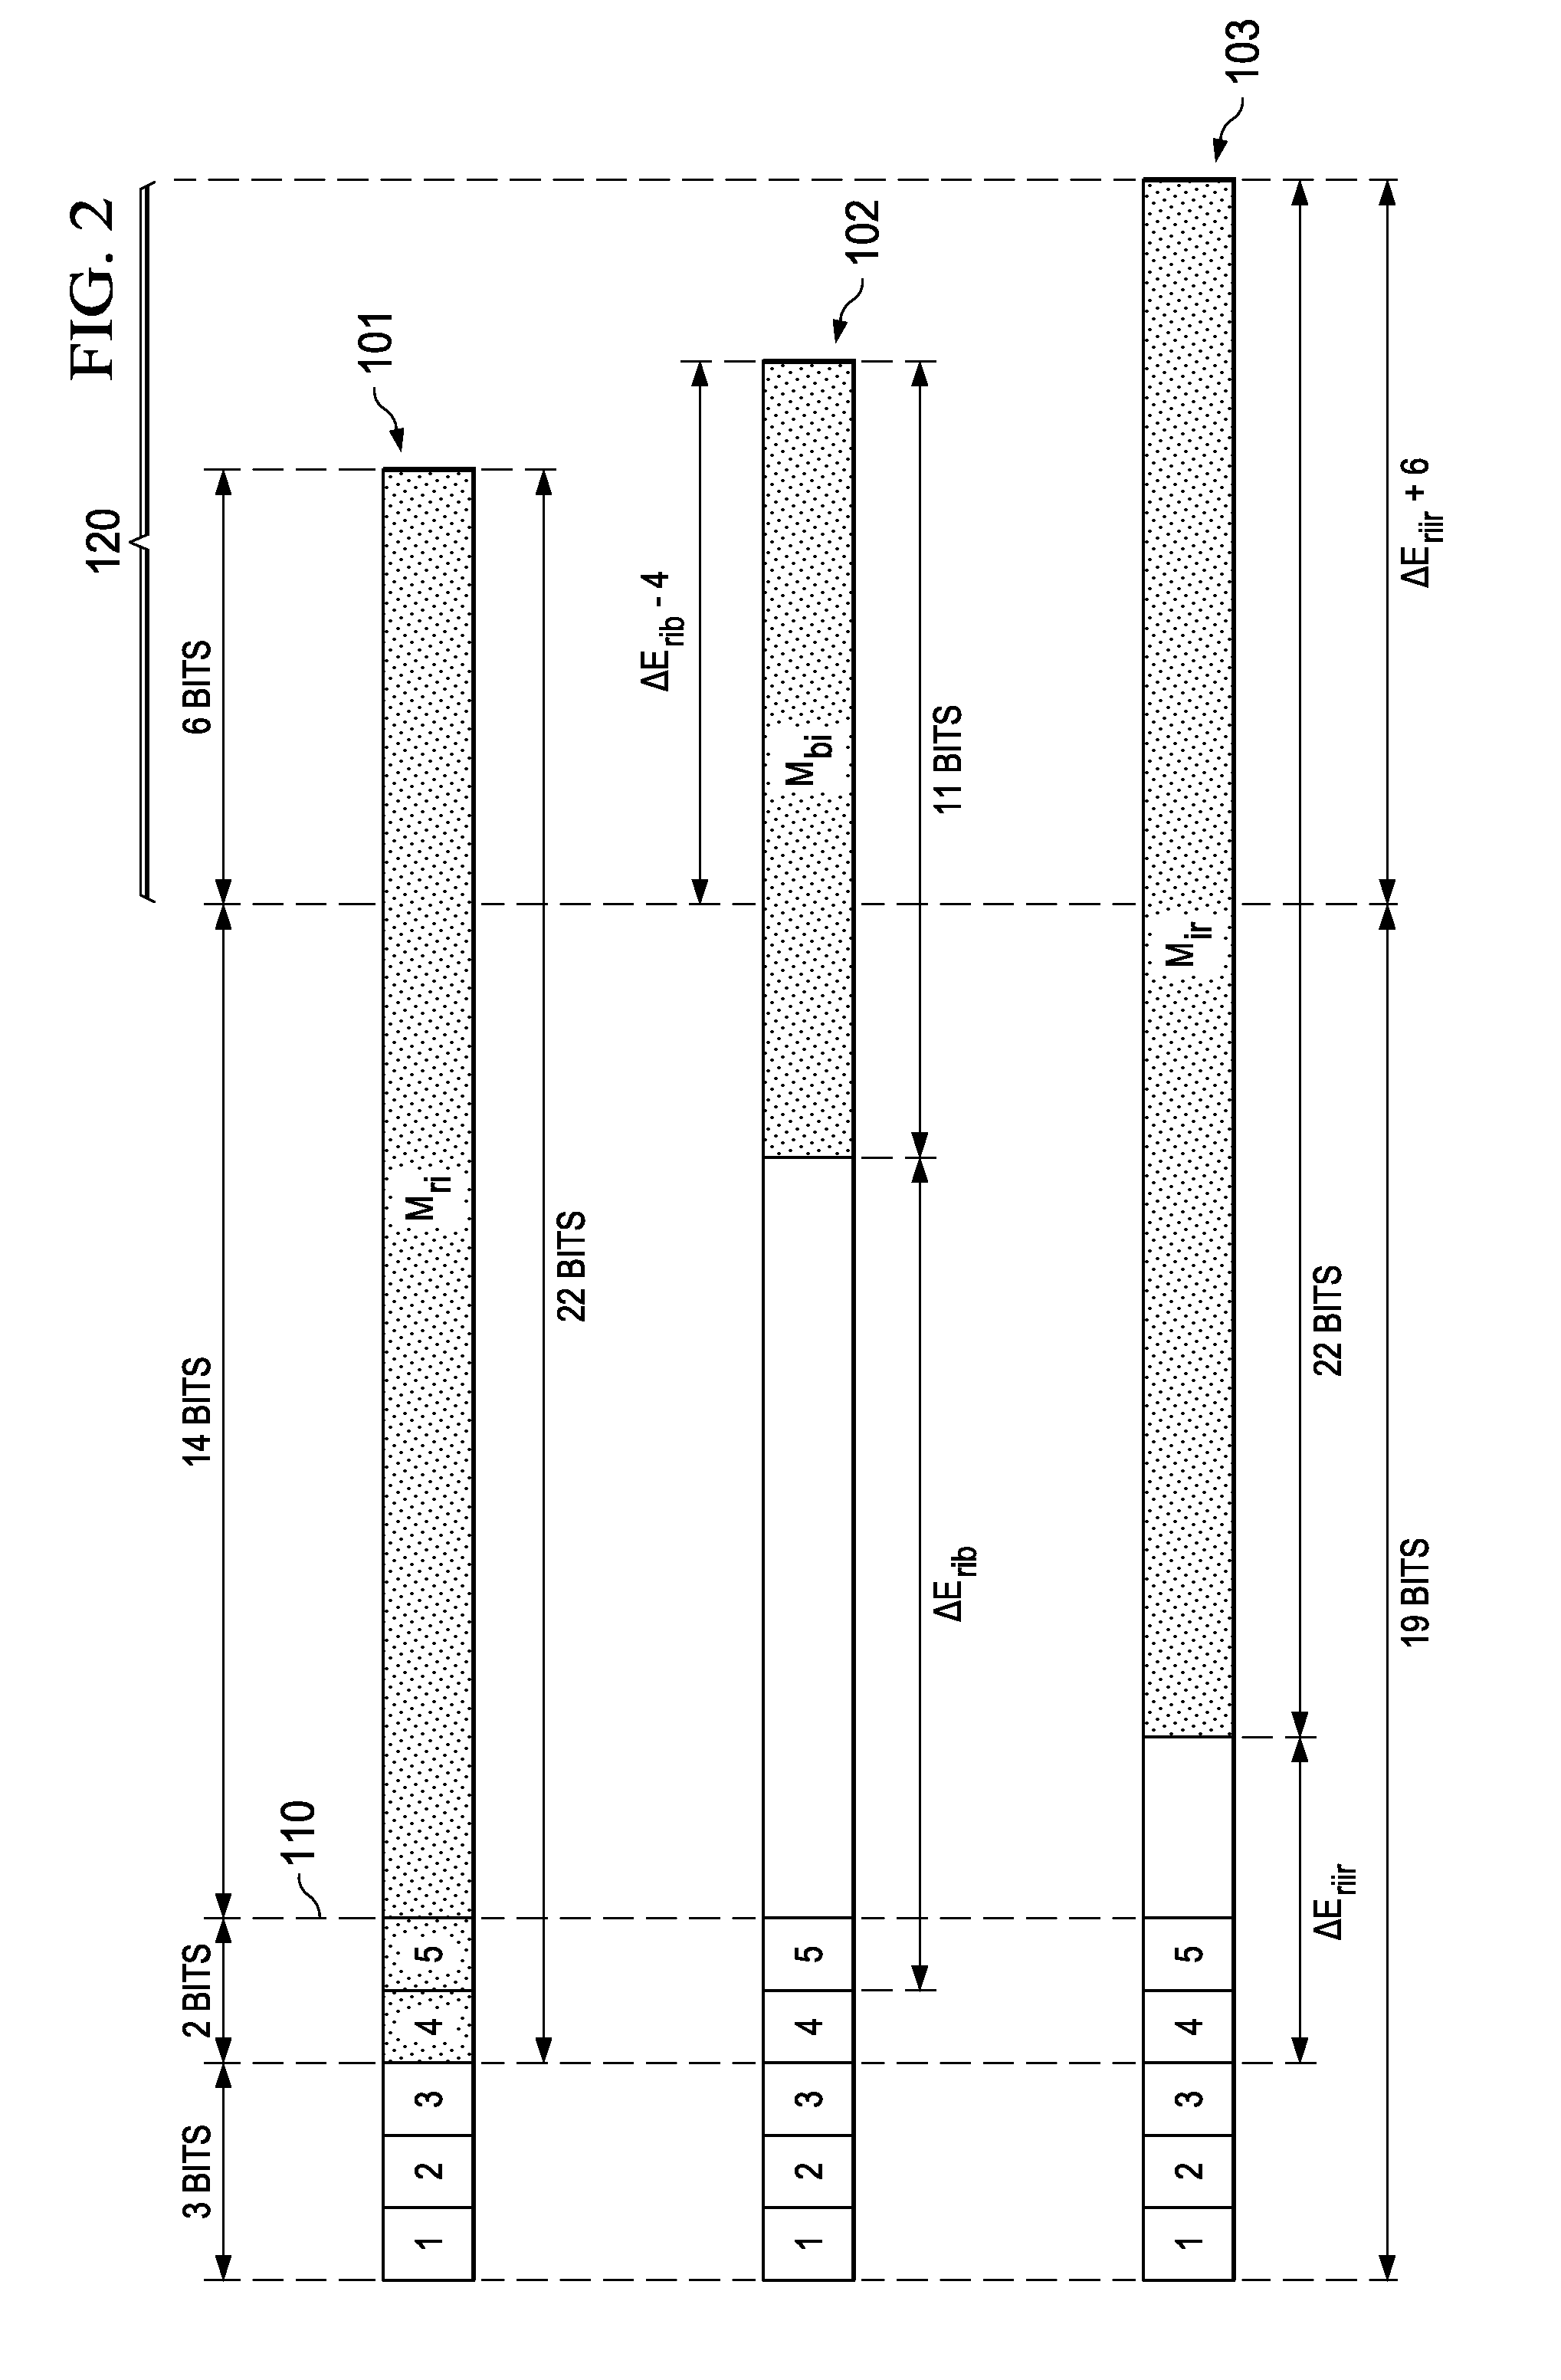 System and Method for Signal Processing in Digital Signal Processors